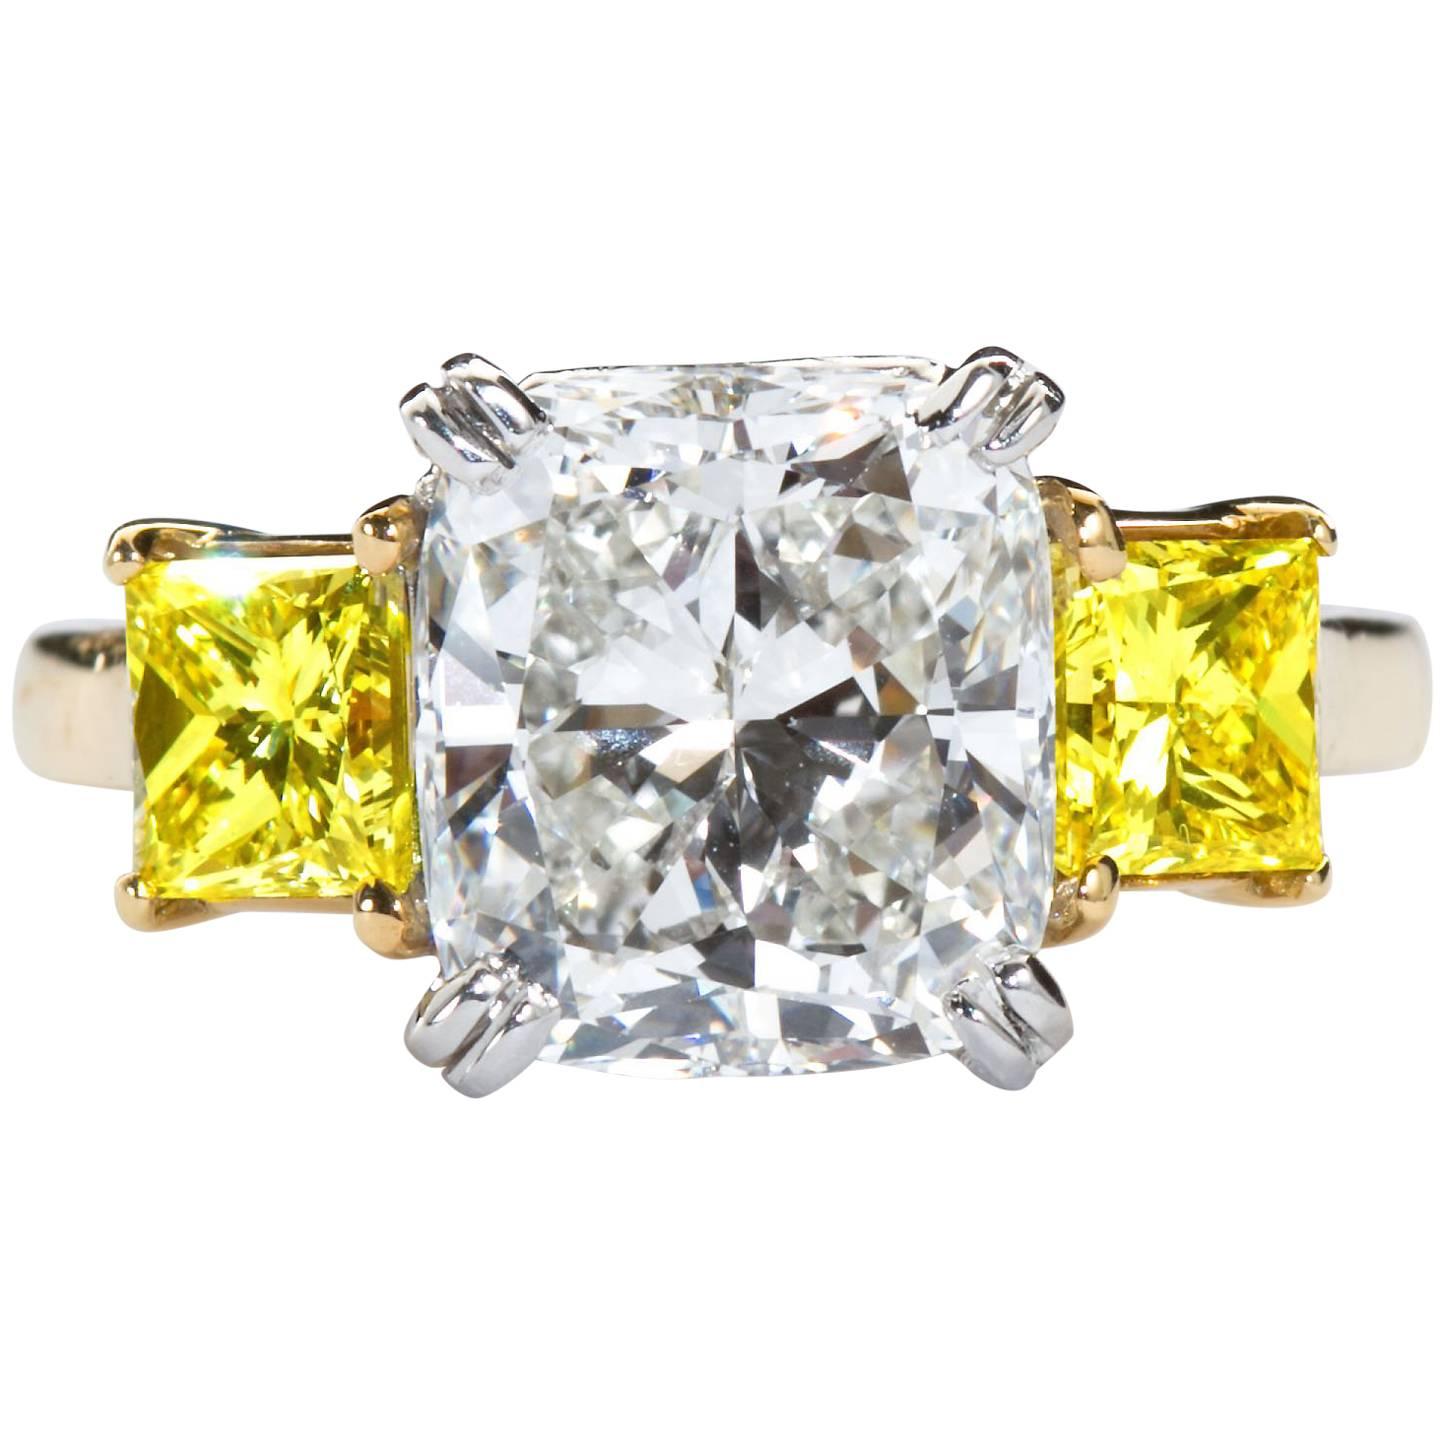 3.55 Carat Cushion Cut Diamond and Fancy Intense Yellow Princess Sides Ring GIA For Sale